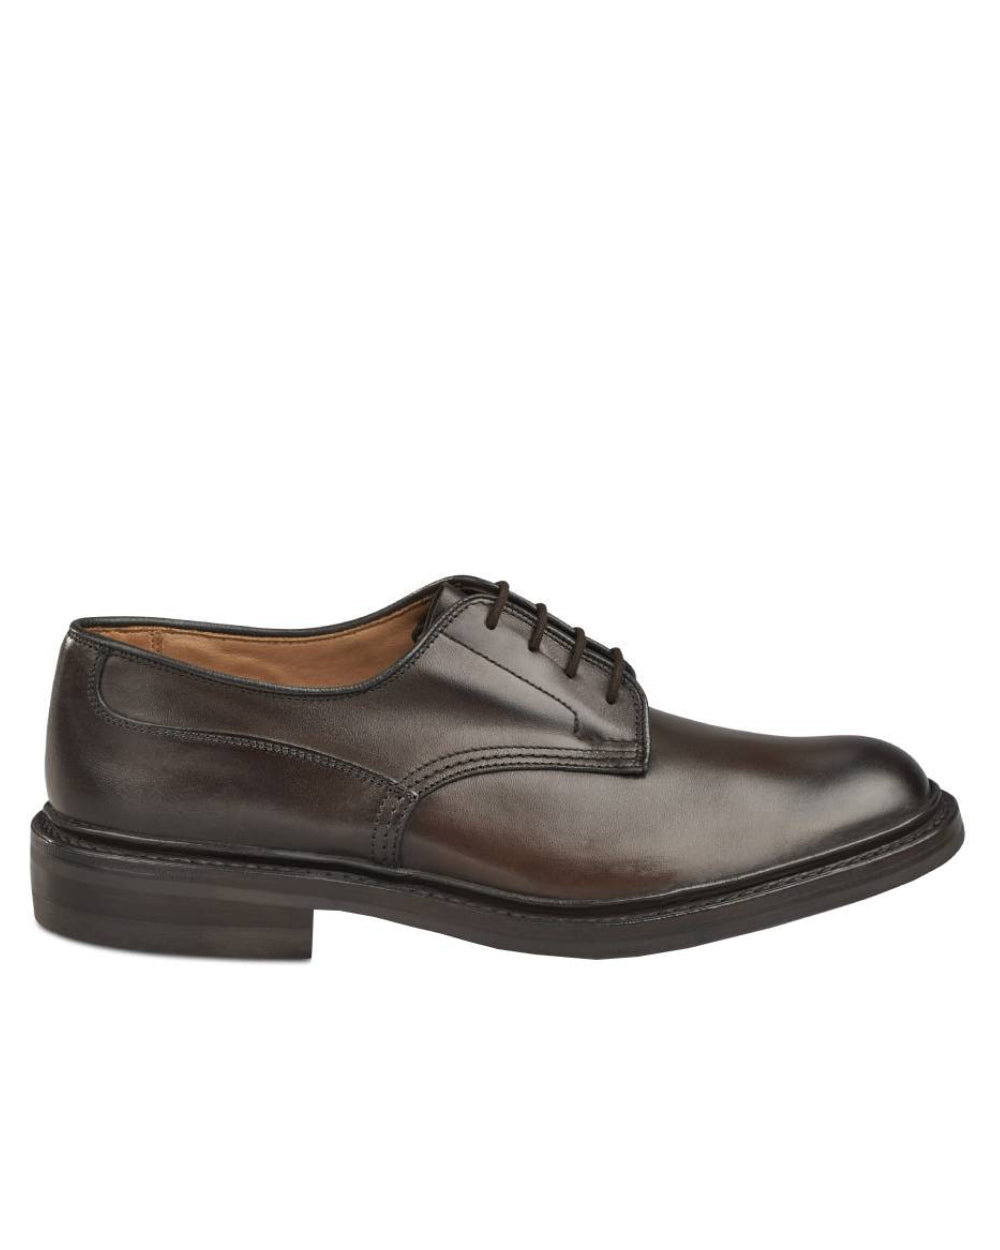 Espresso Burnished Coloured Trickers Woodstock Plain Derby Shoe On A White Background 